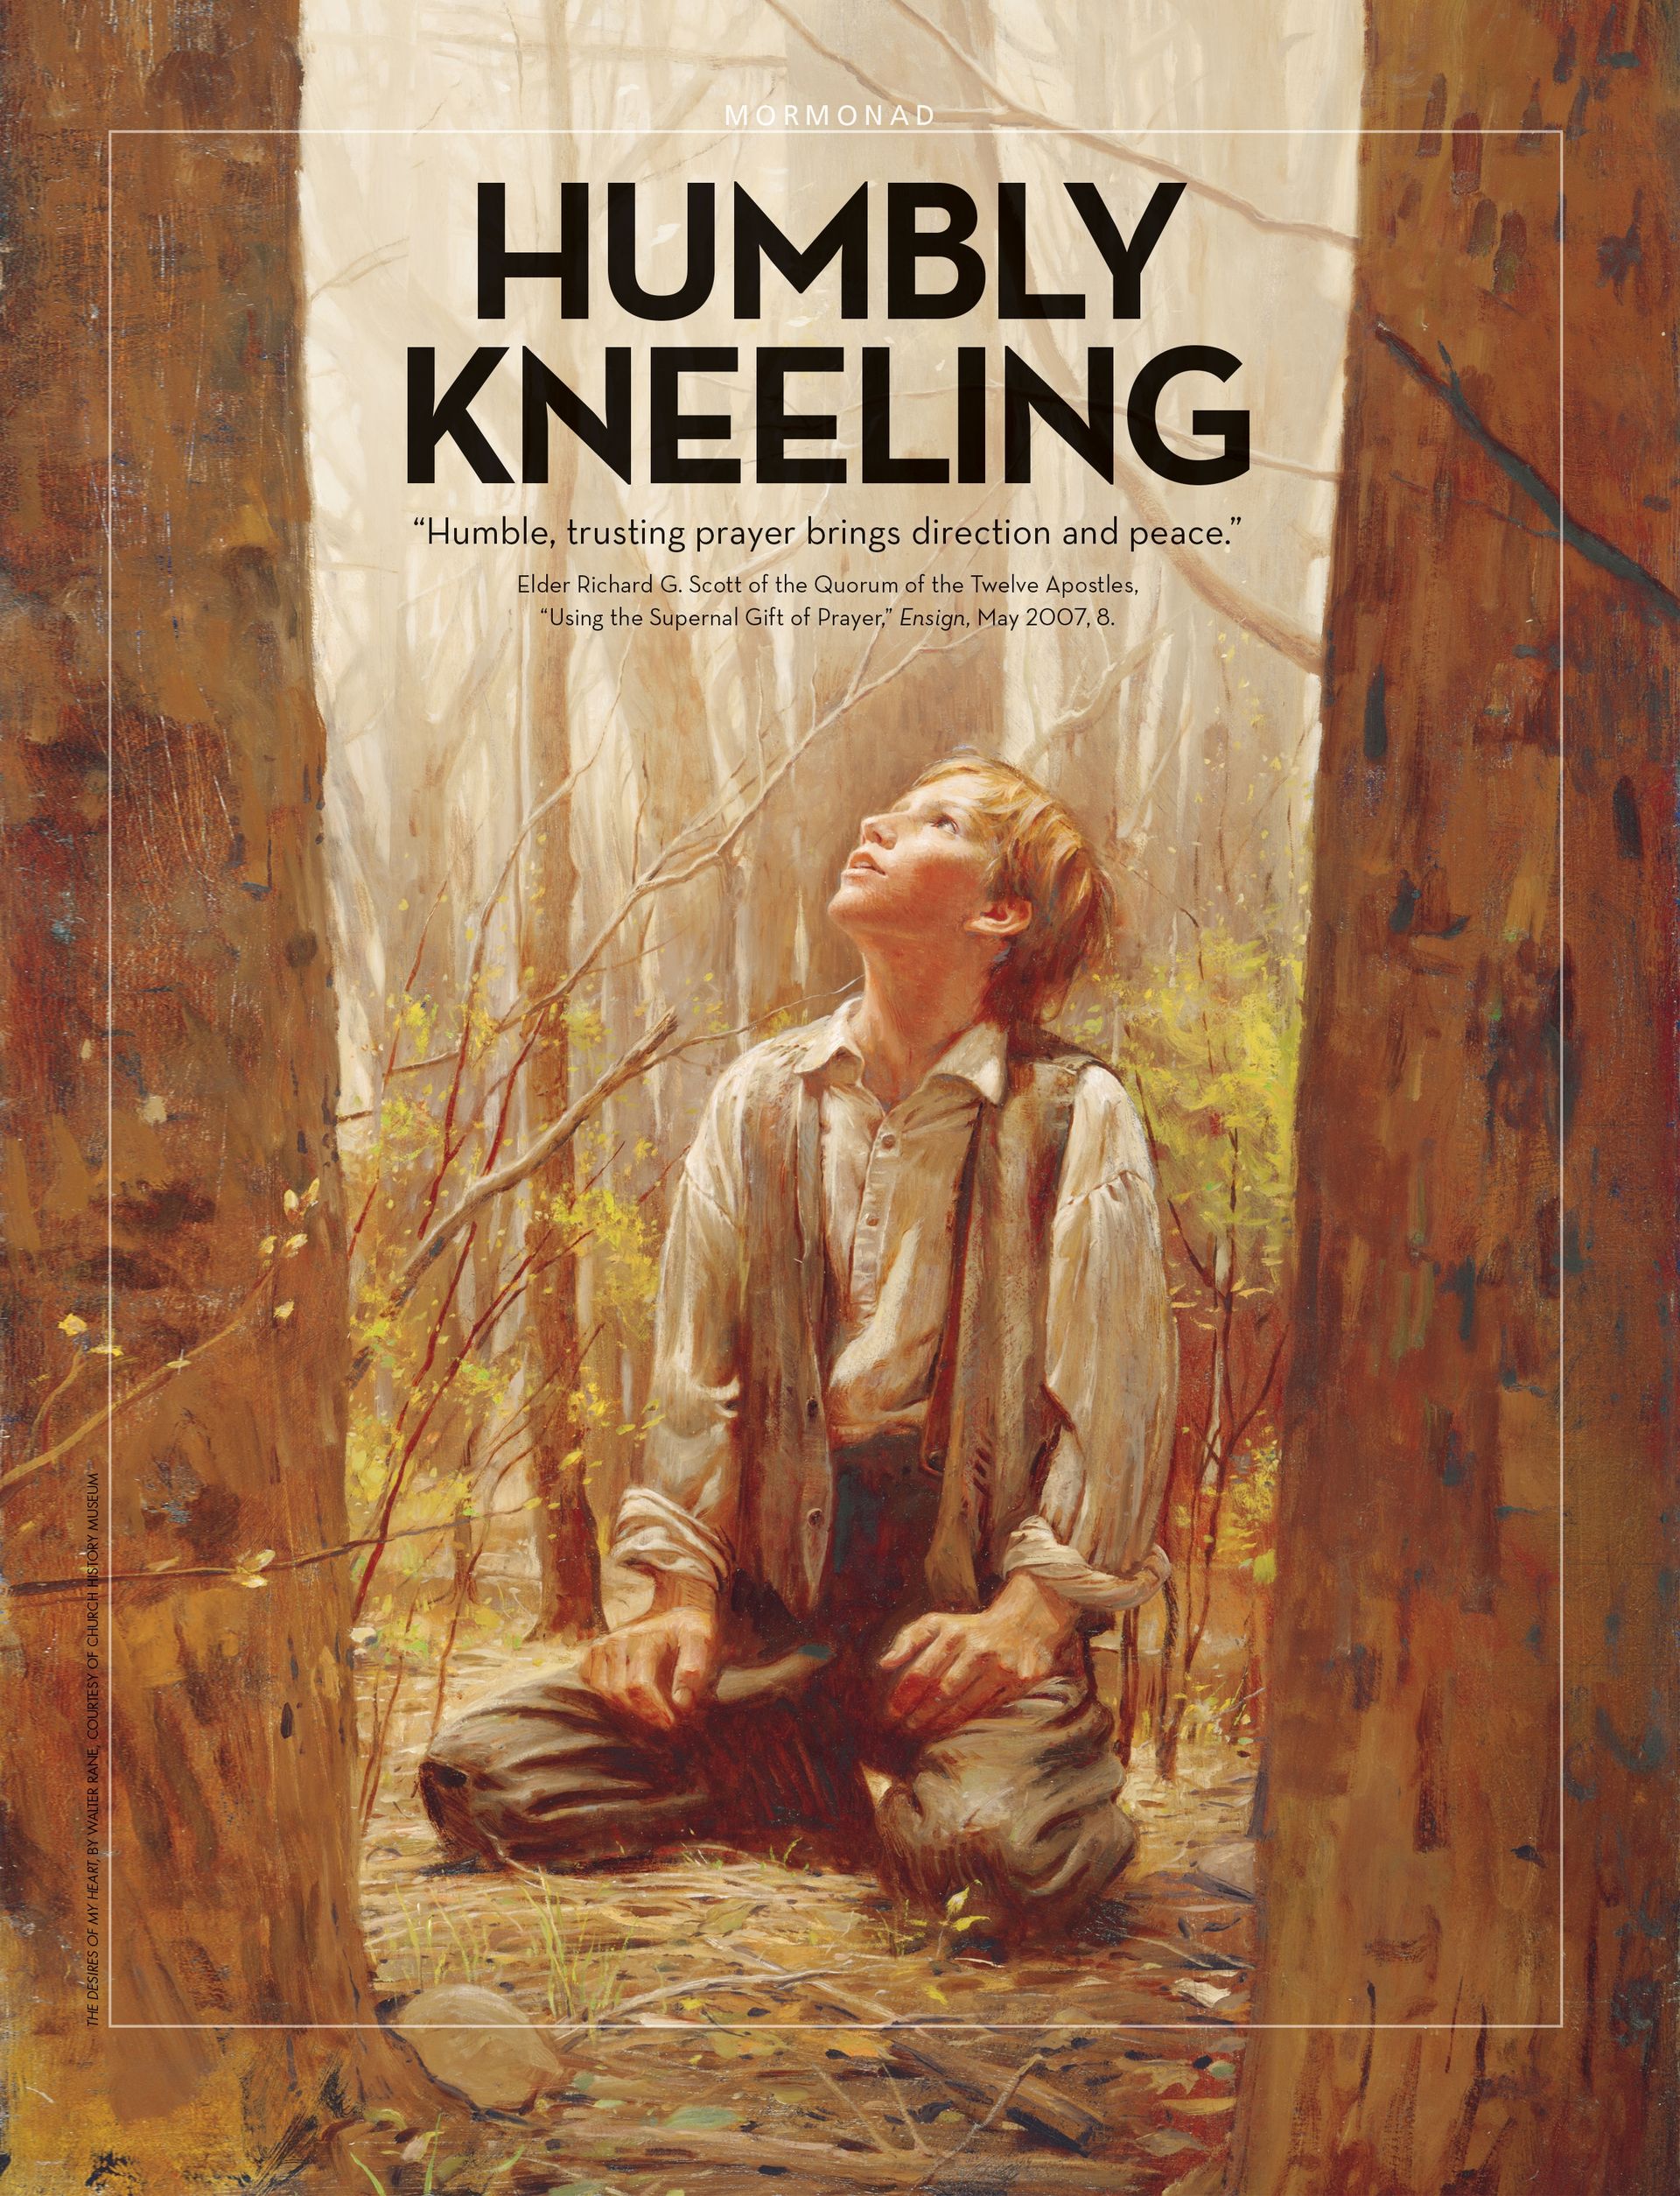 Humbly Kneeling. “Humble, trusting prayer brings direction and peace.” Elder Richard G. Scott of the Quorum of the Twelve Apostles, “Using the Supernal Gift of Prayer,” Ensign, May 2007, 8. June 2012